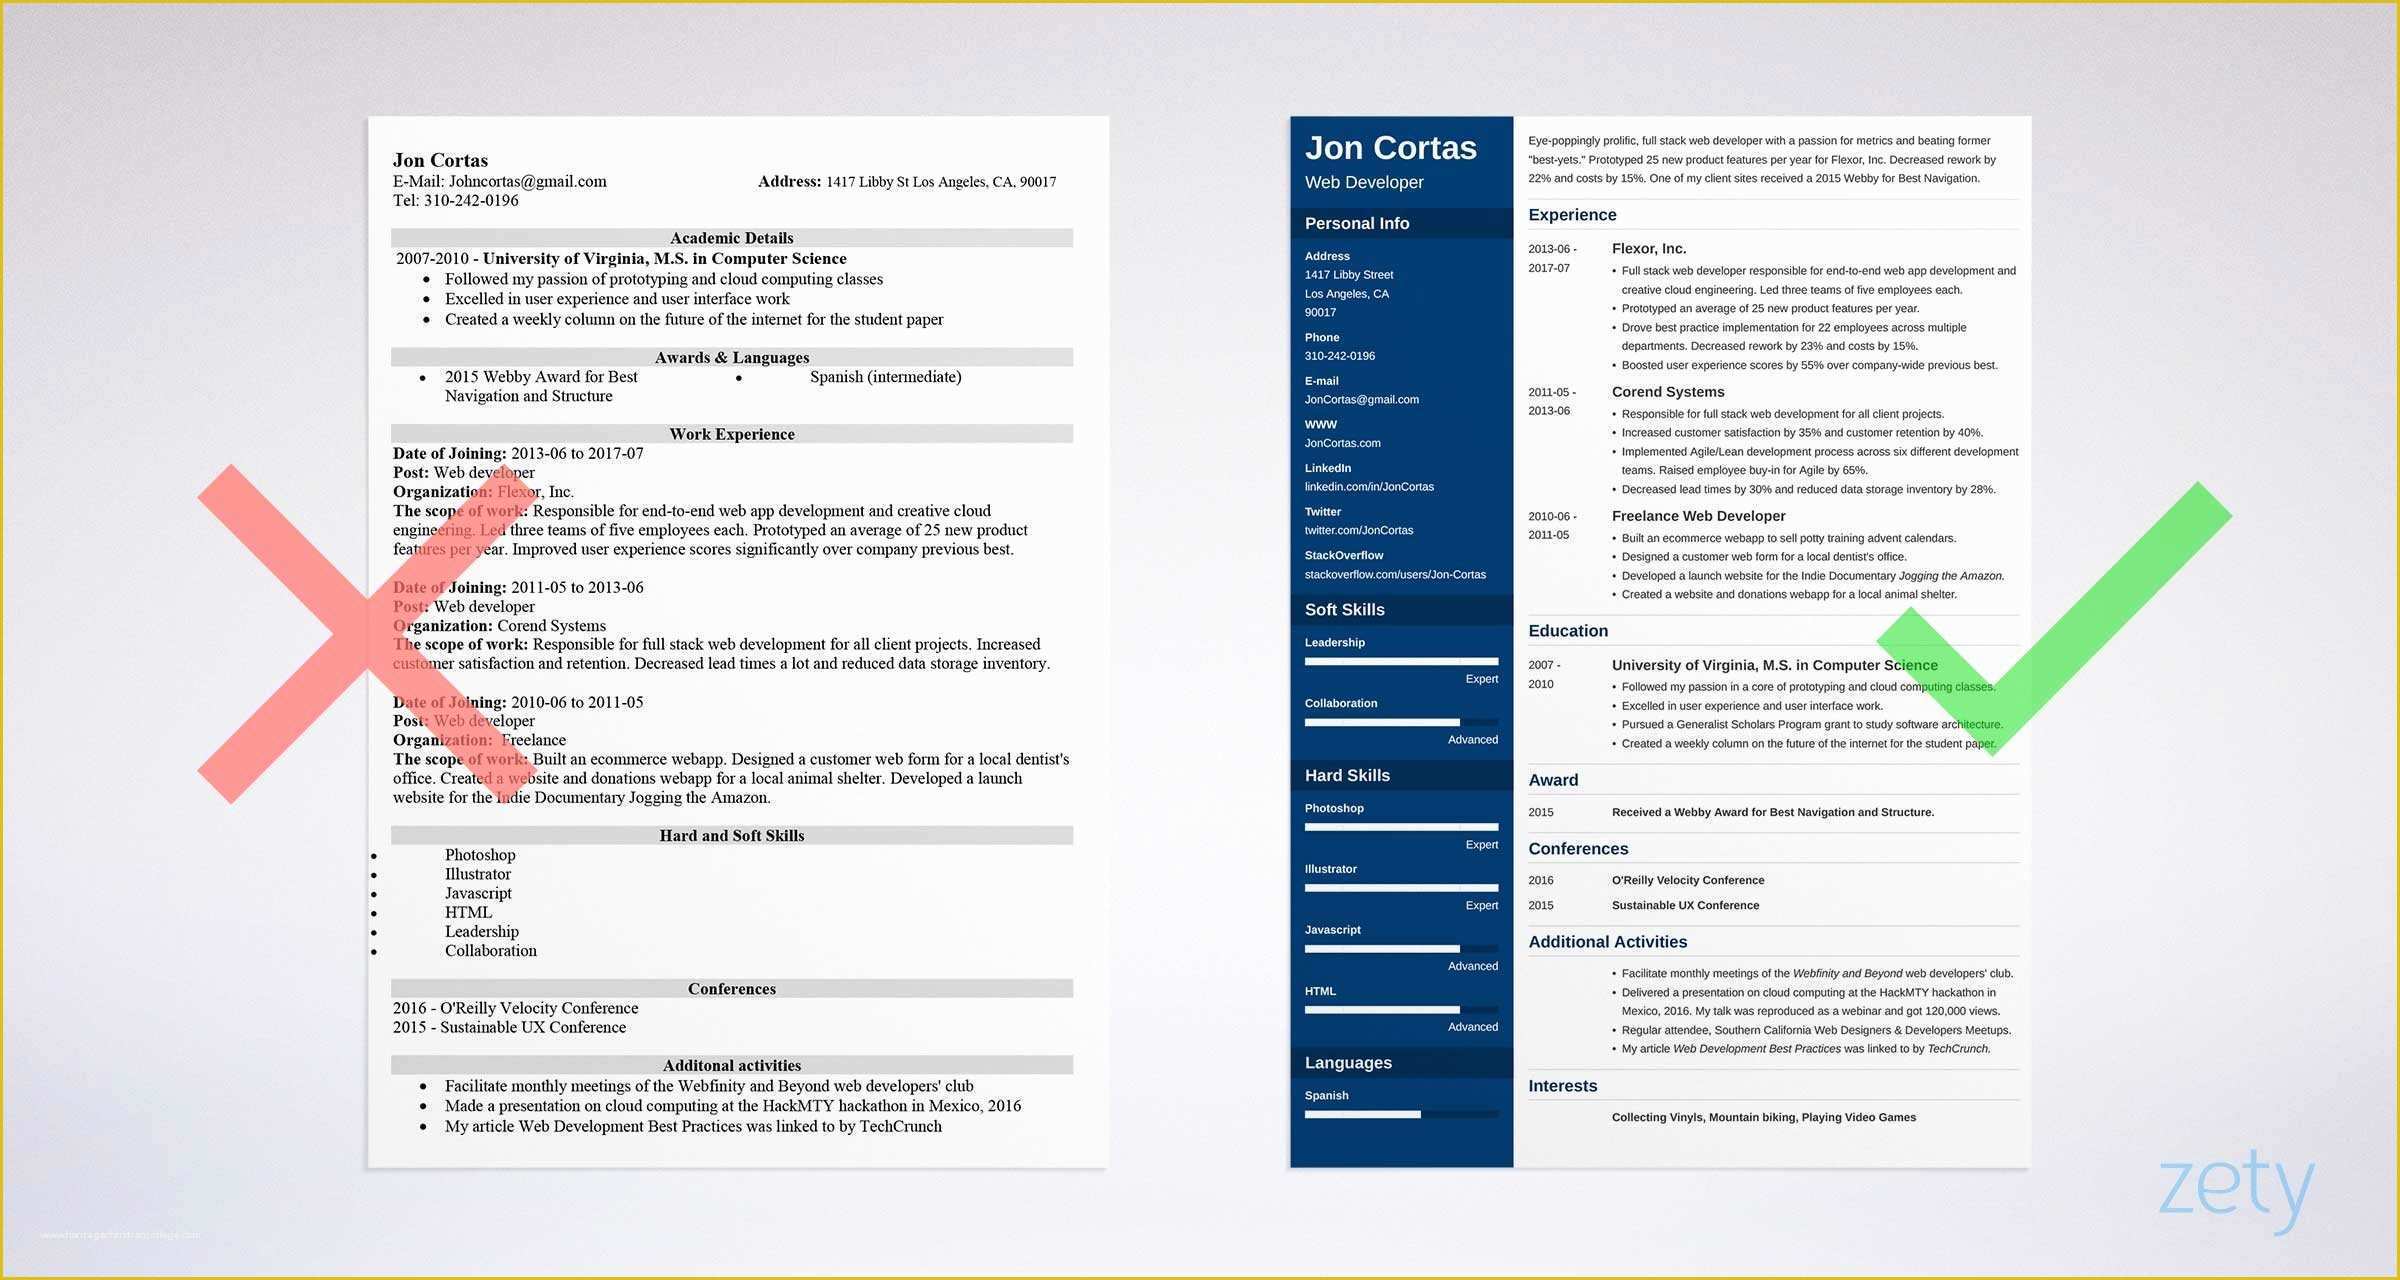 Free Professional Resume Templates Word Of Free Resume Templates for Word 15 Cv Resume formats to